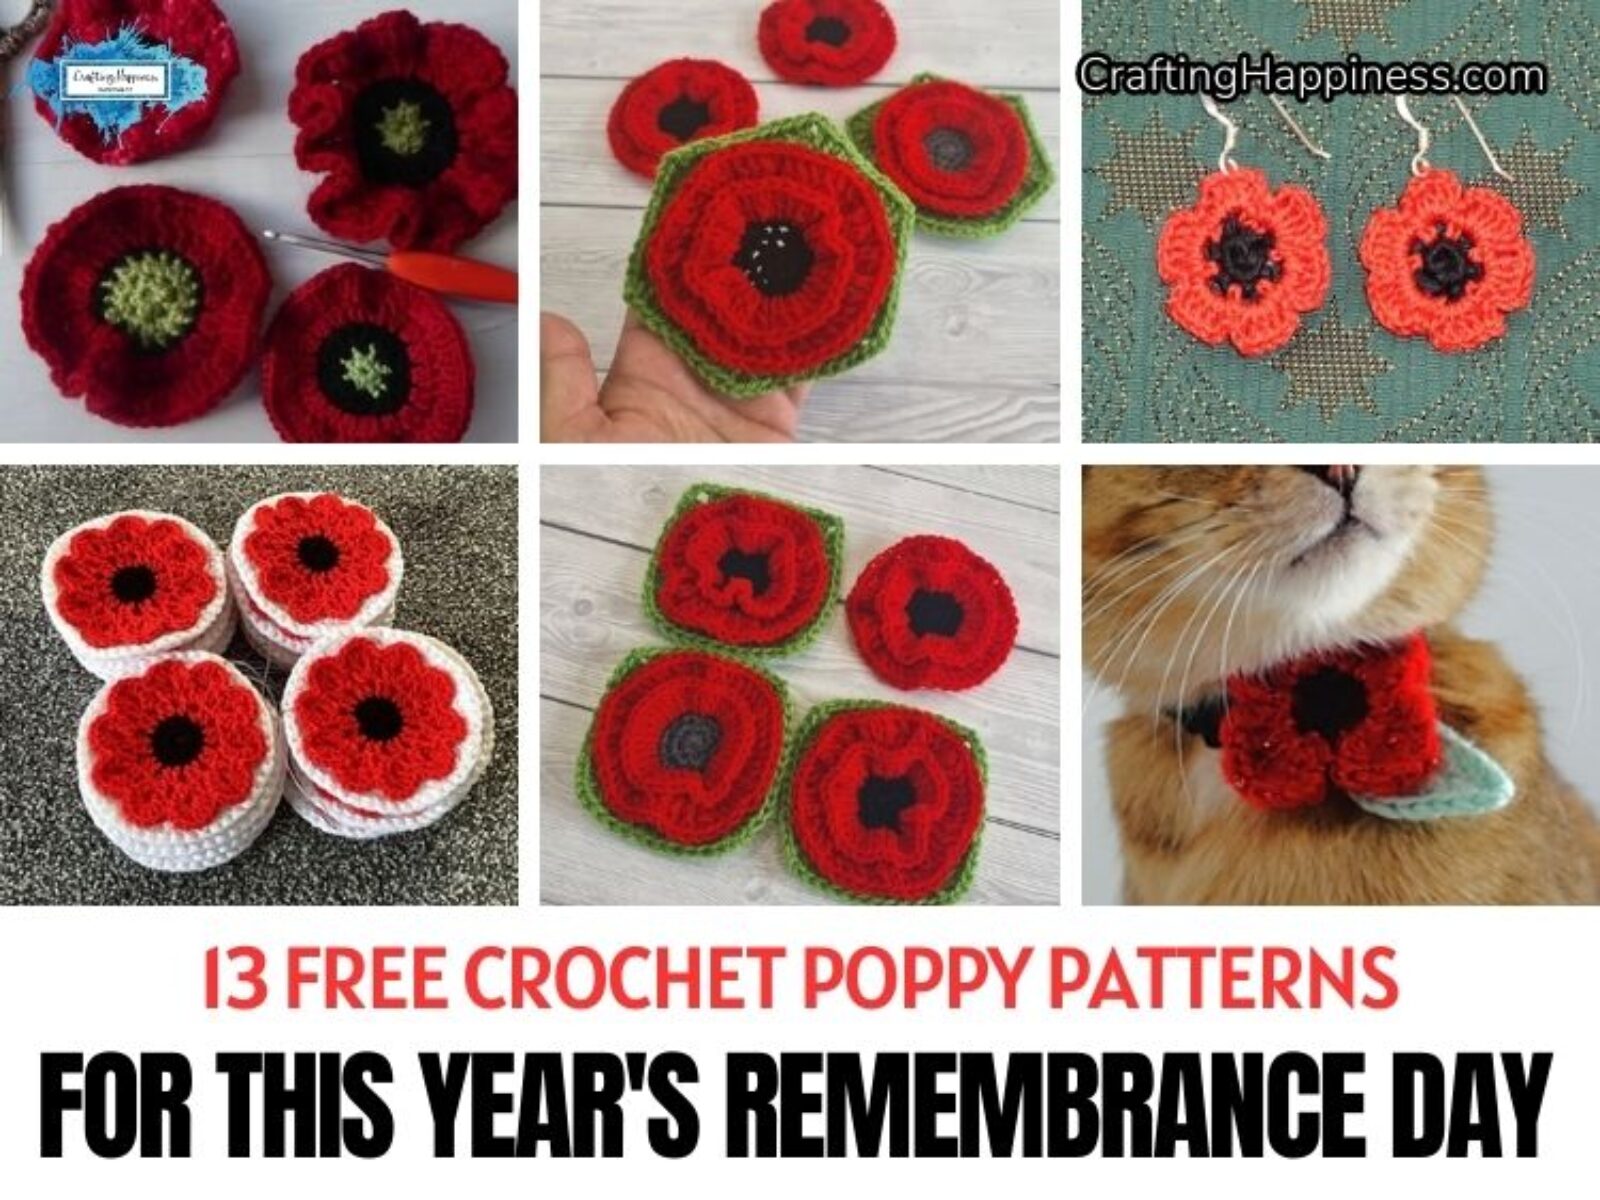 FB POSTER - 13 Free Crochet Poppy Patterns For This Year's Remembrance Day - Crafting Happiness